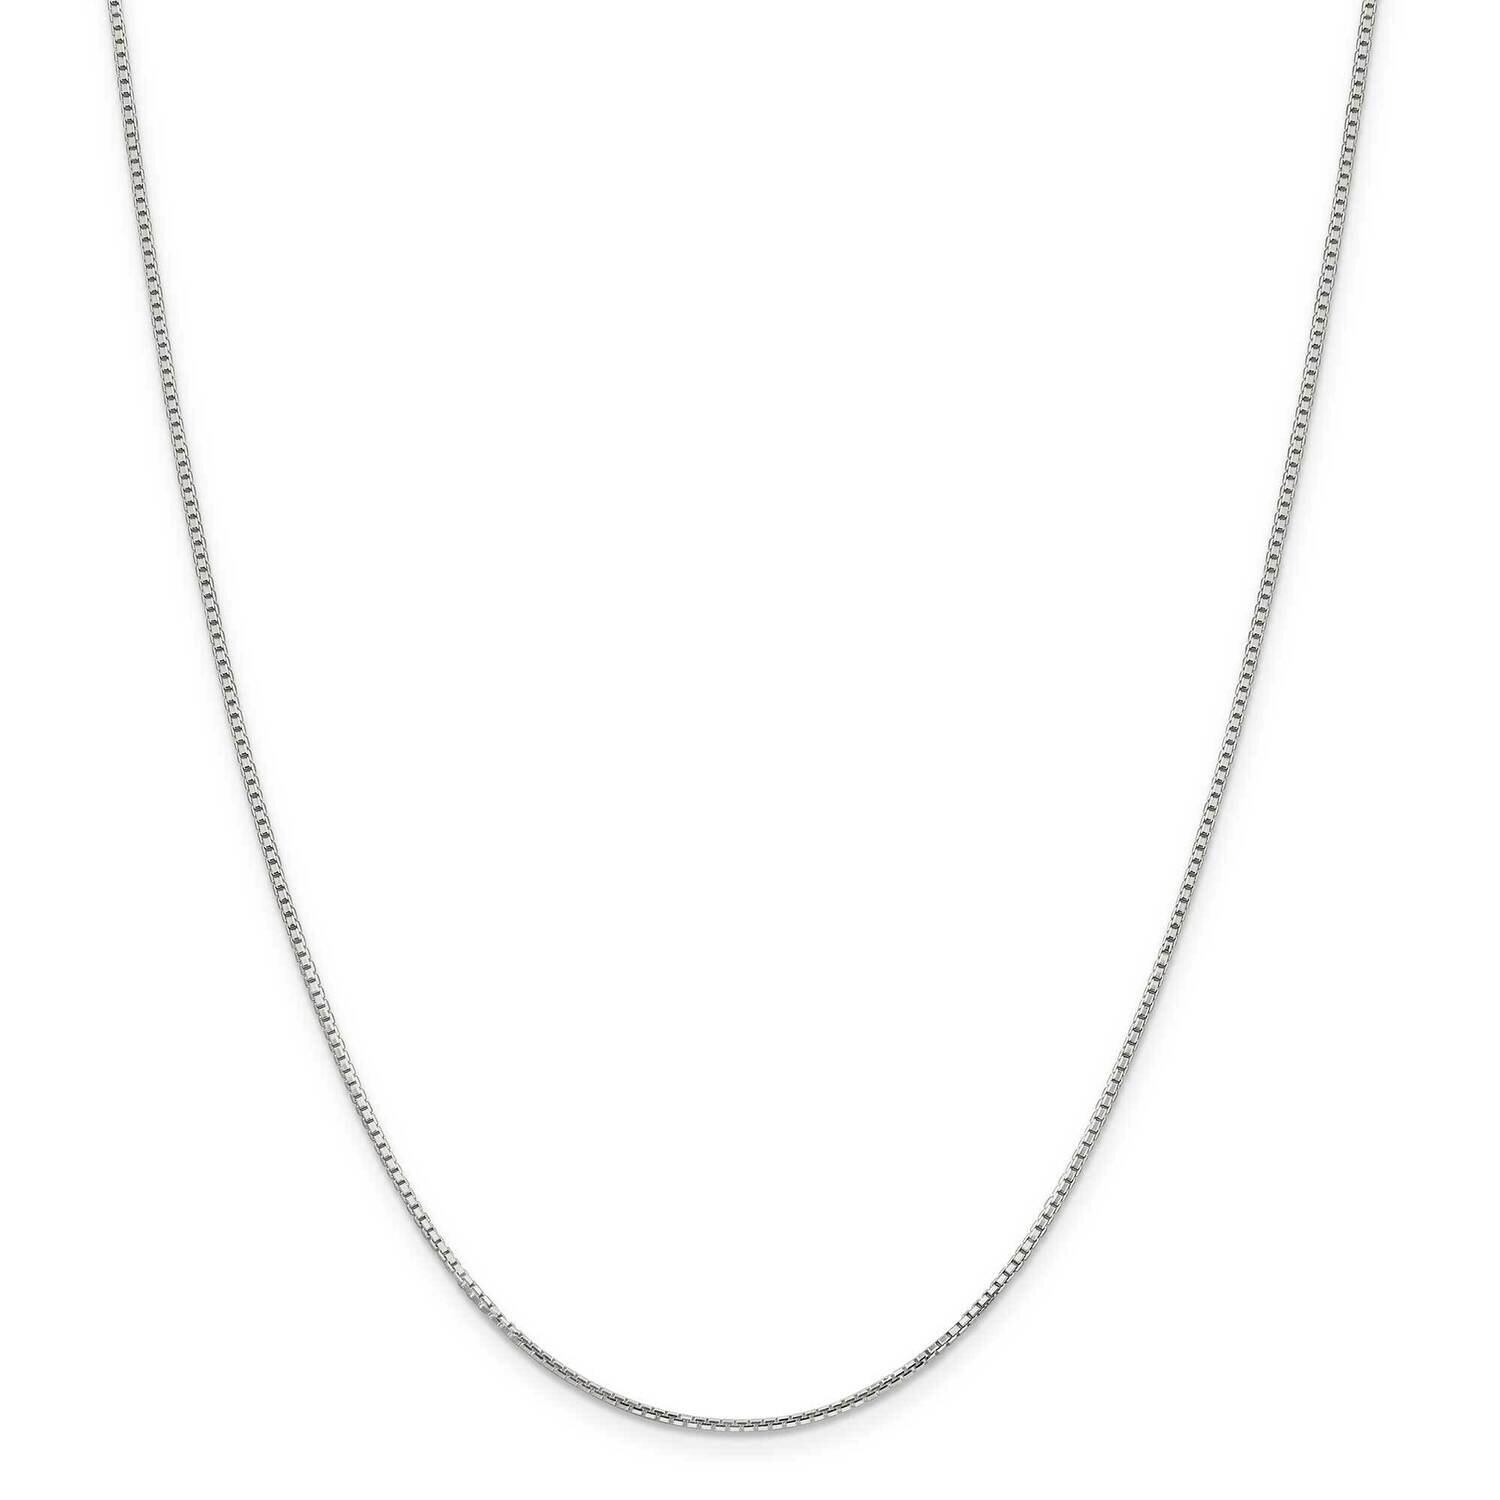 1.25mm 8 Sided Diamond-Cut Box Chain with 2 Inch Extender 18 Inch Sterling Silver QBR024E-18